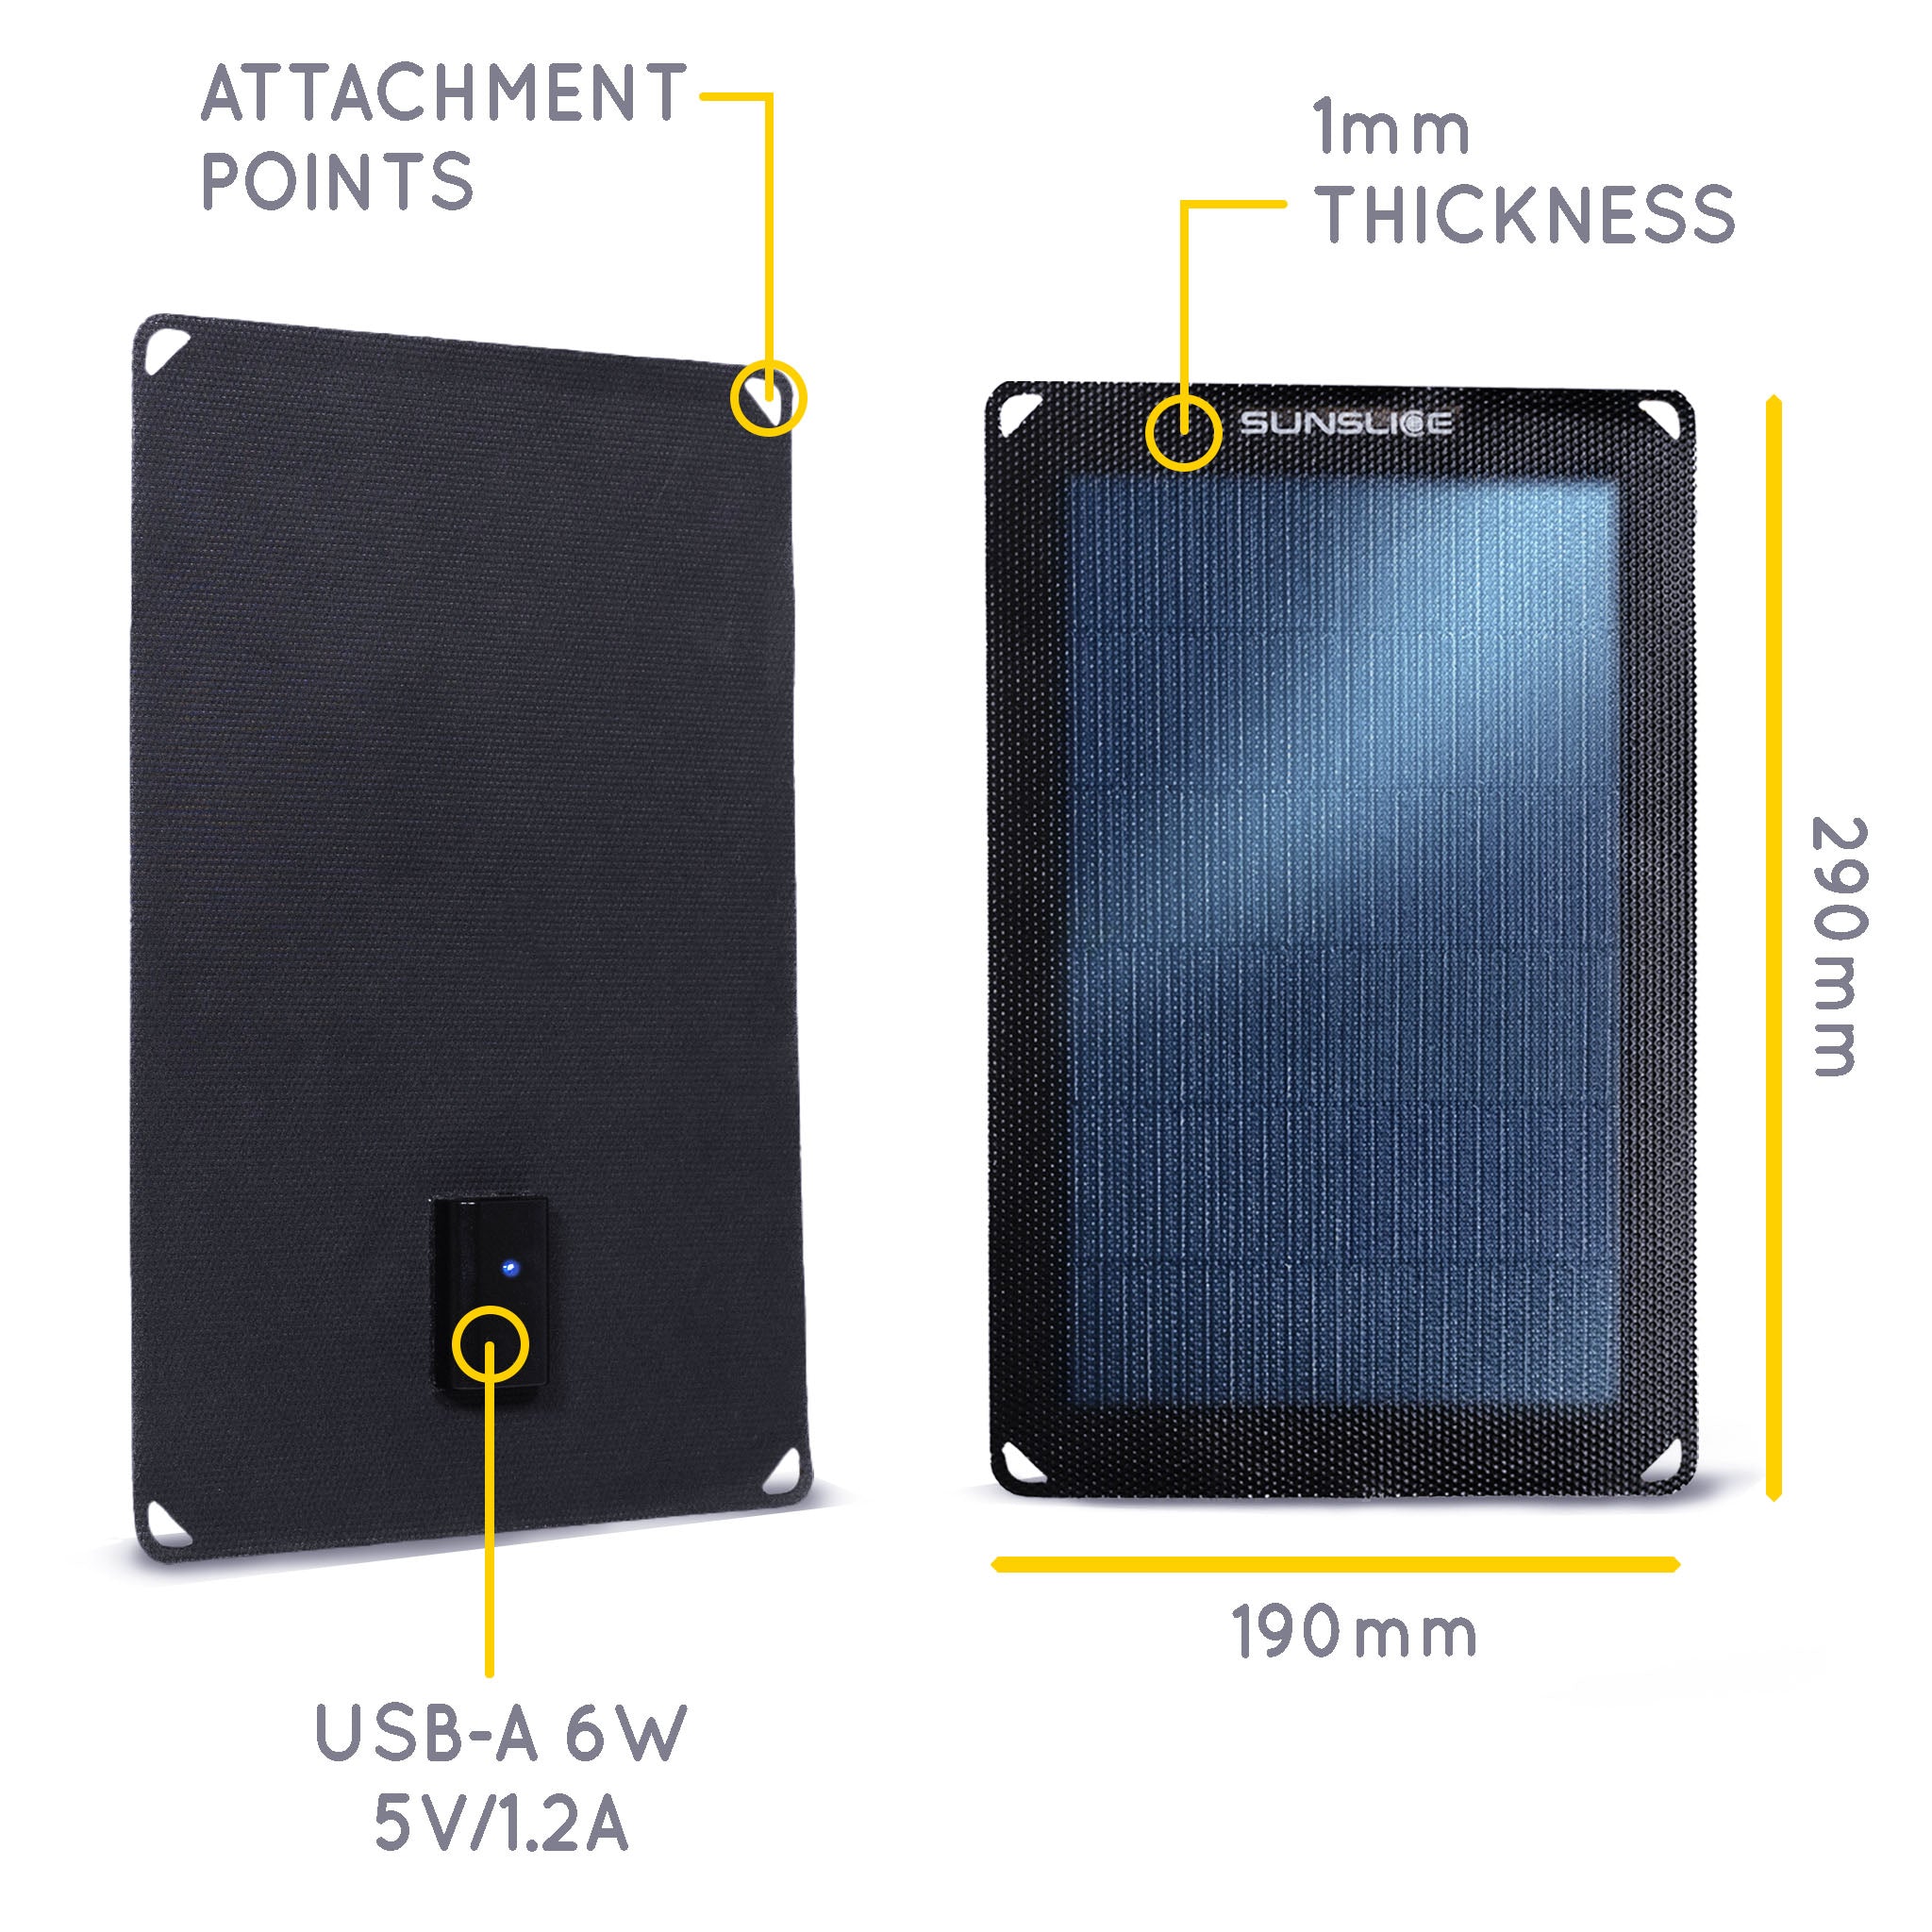 Portable solar panel informations : Size: 290 mm, 190 mm,, Thickness: 1mm. Output : USB-A 6w 